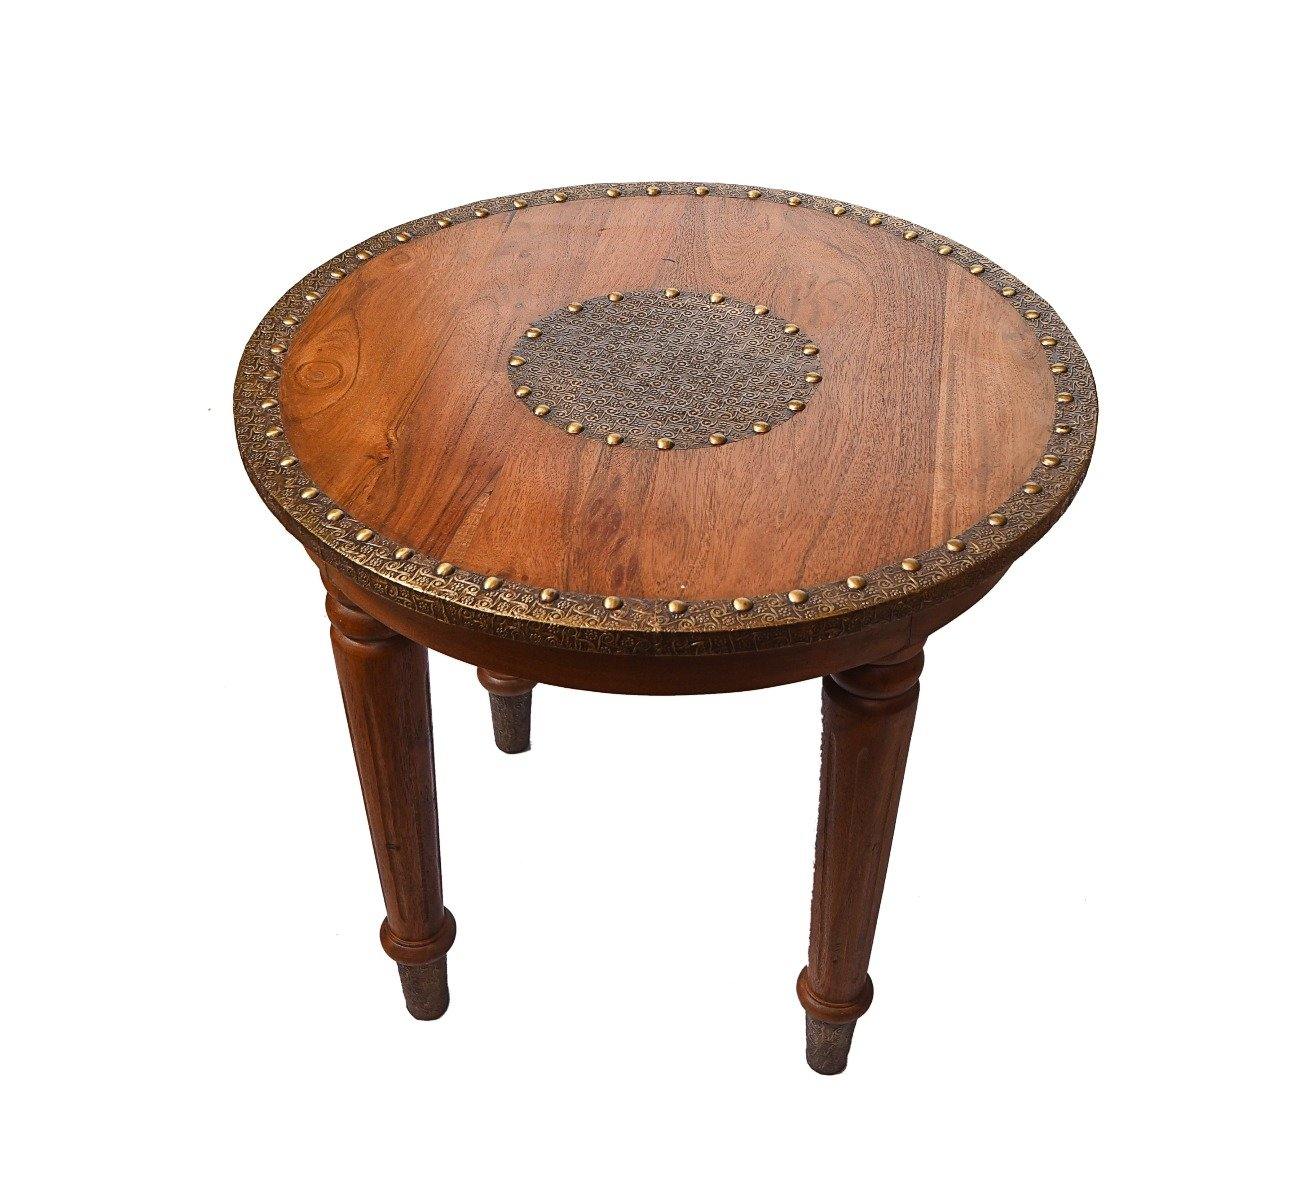 Solid Acacia Wood Round End Table with Brass Cladding - YoTreasure